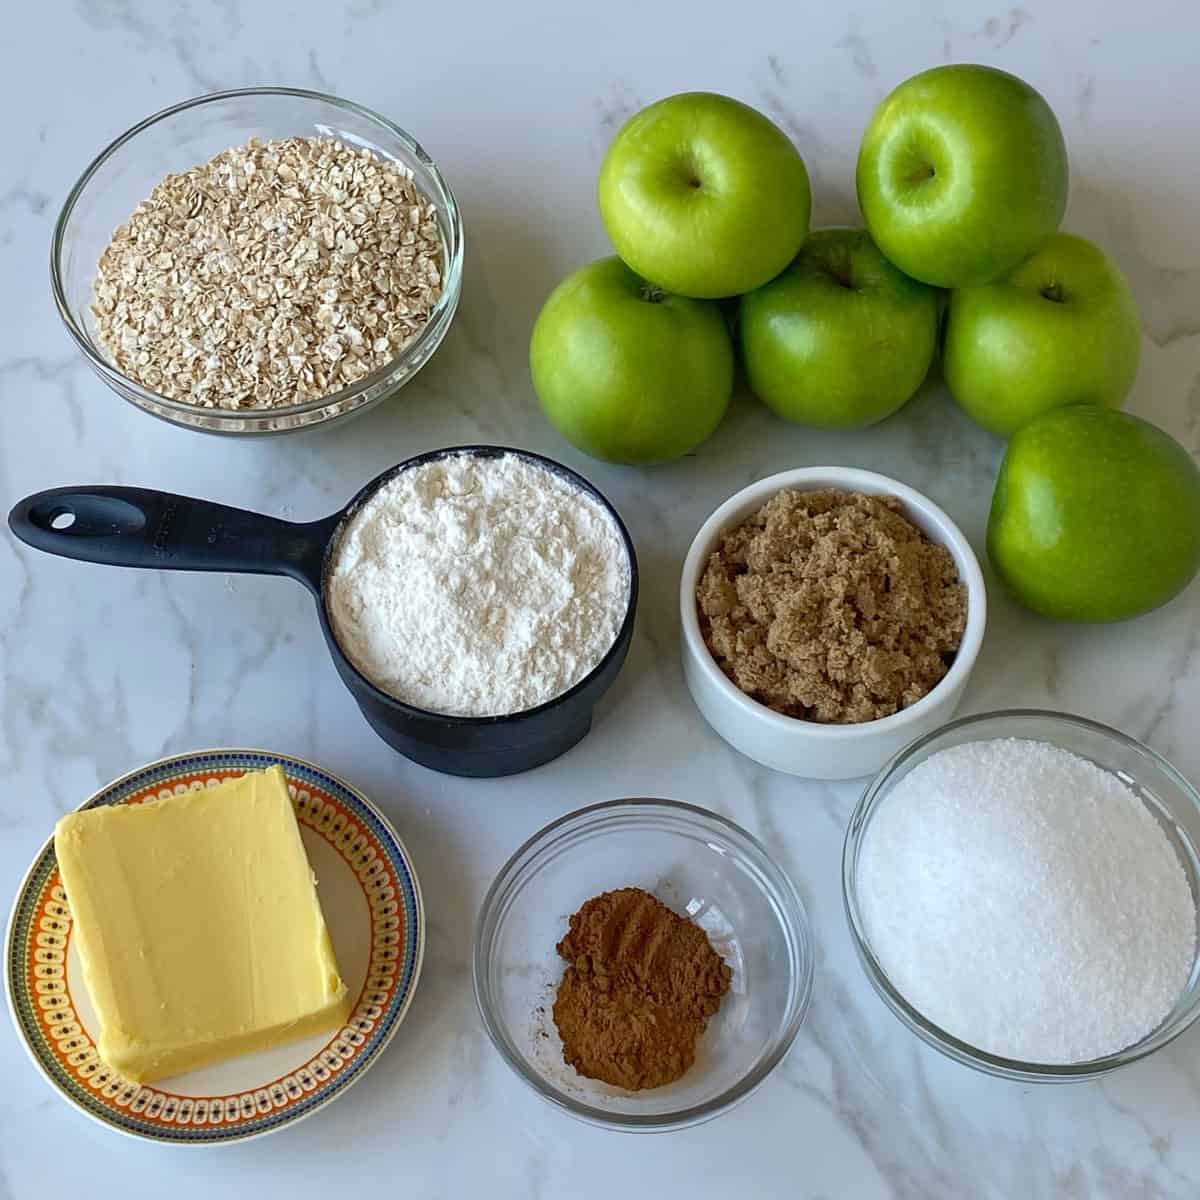 Ingredients used to make apple crumble on a bench.